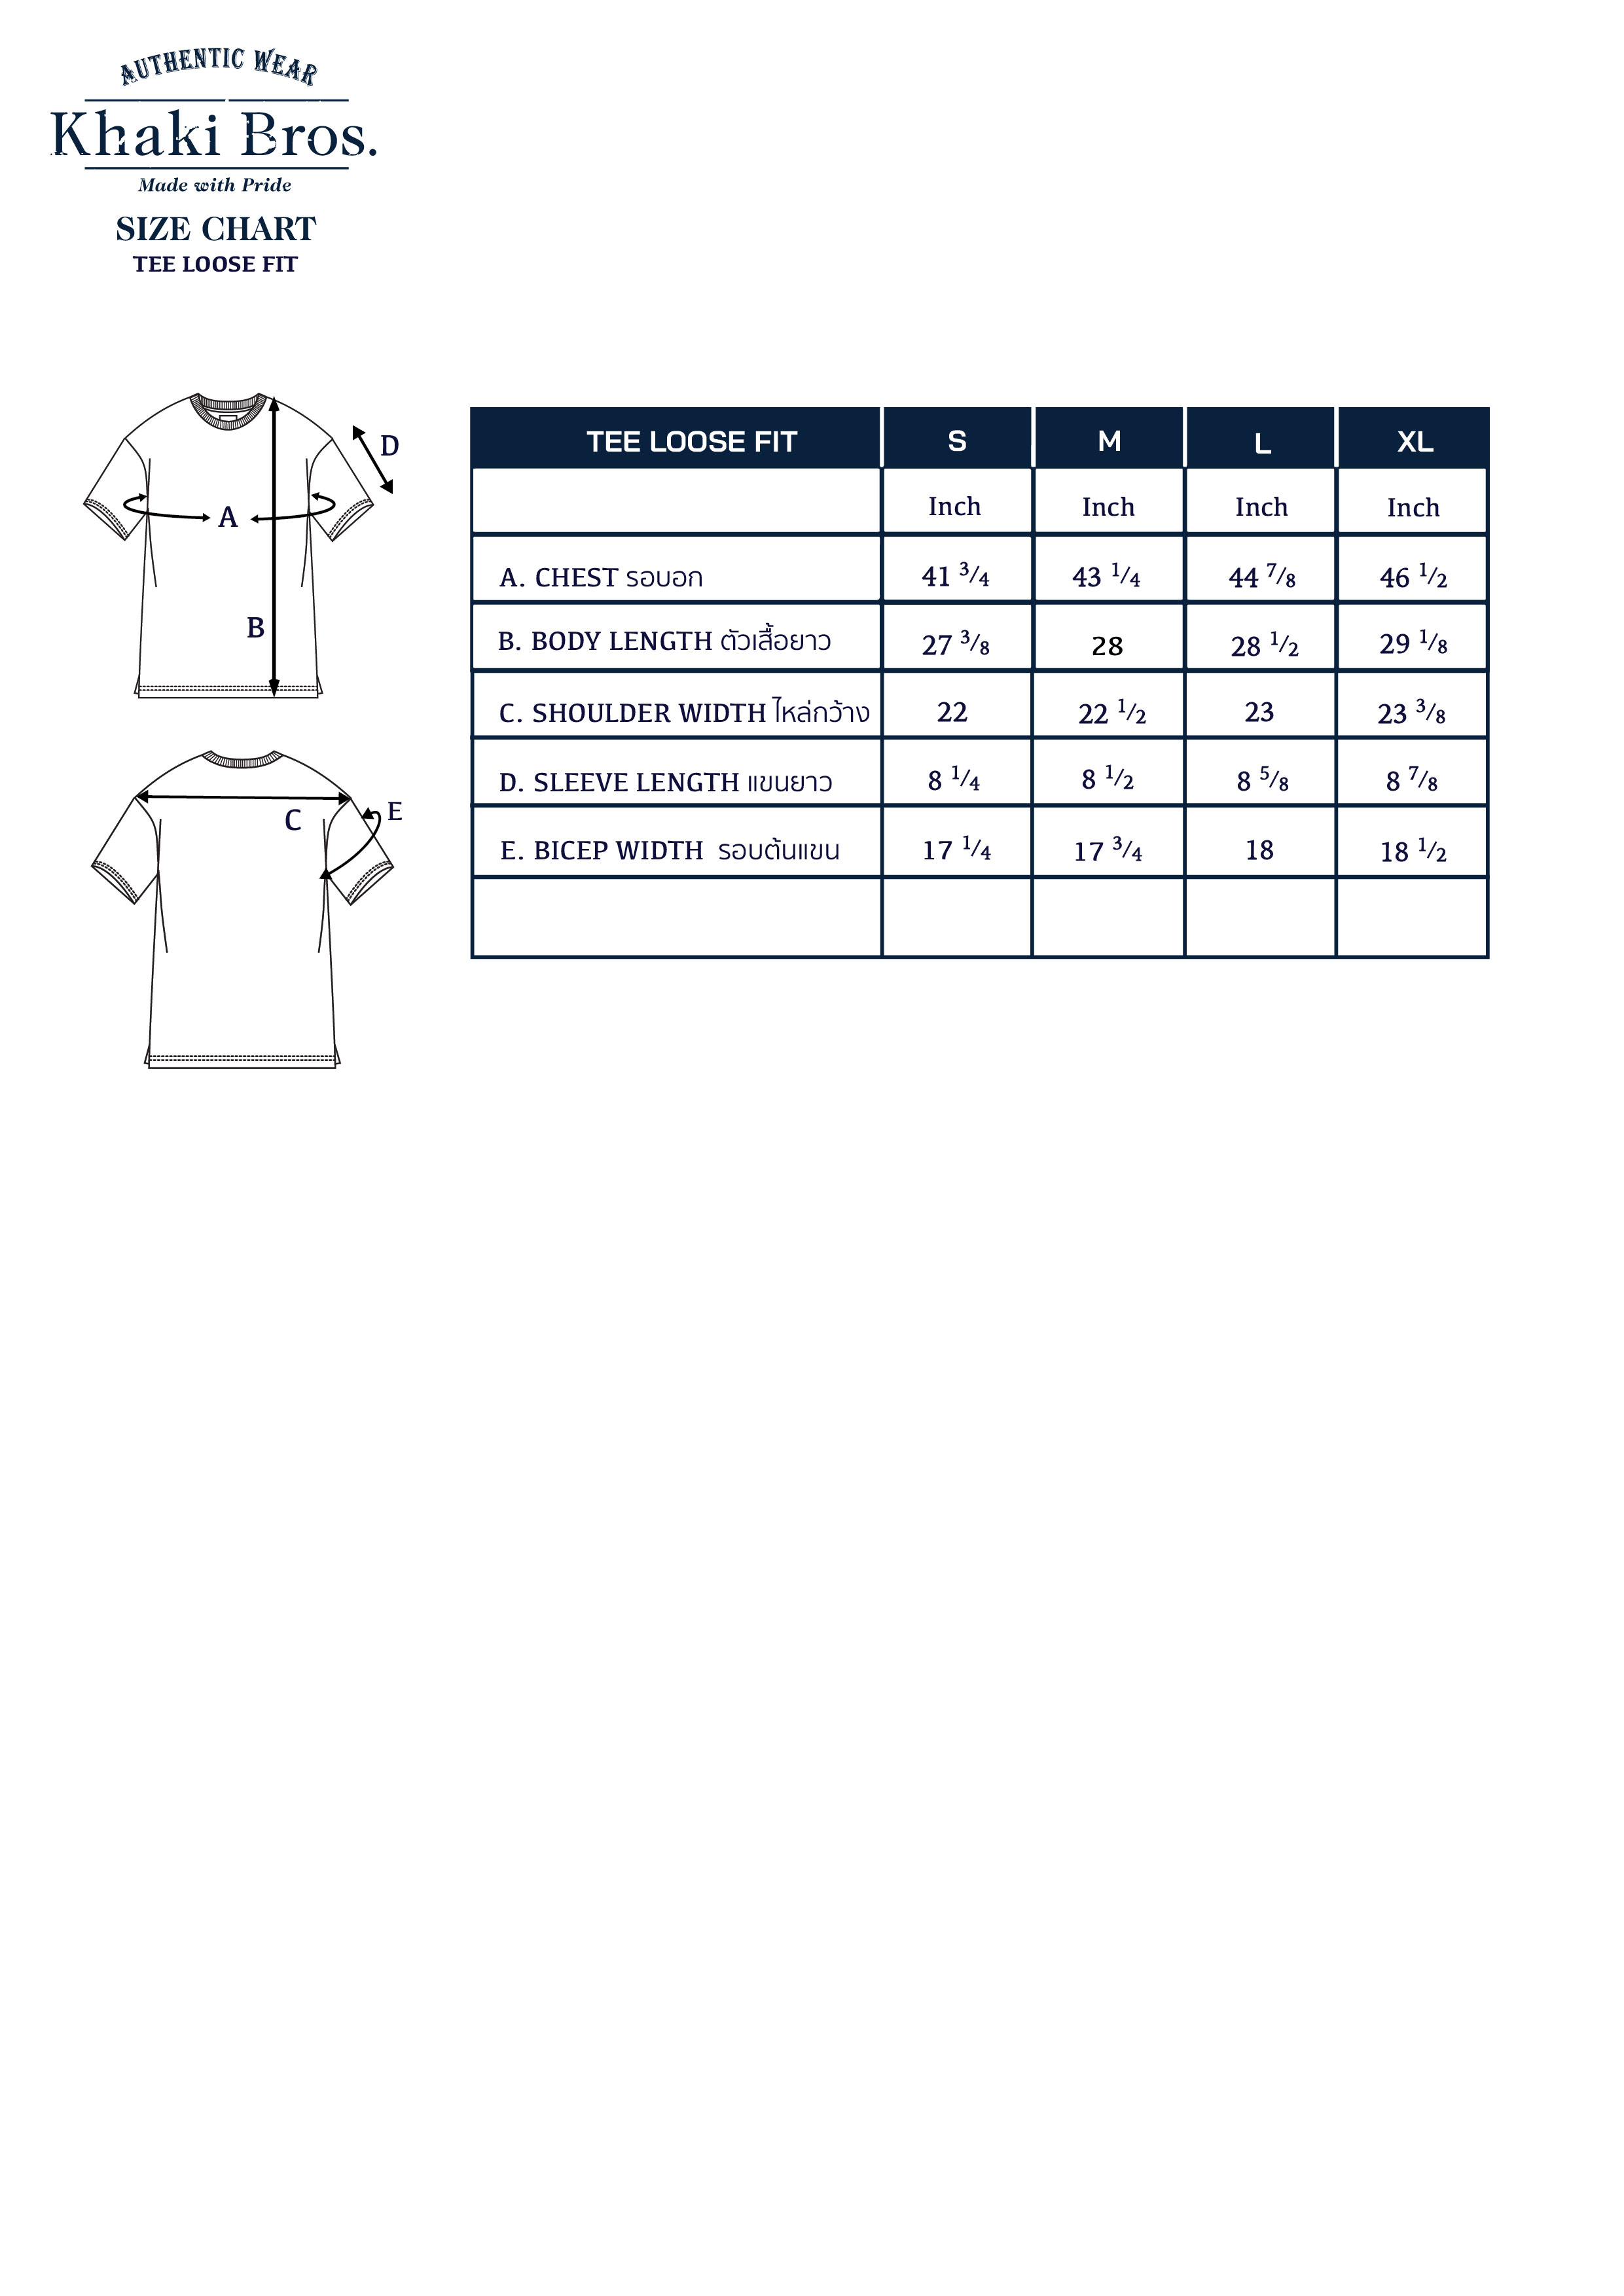 Tee_Loose_Fit_Size_Chart_2022_Update-15_1